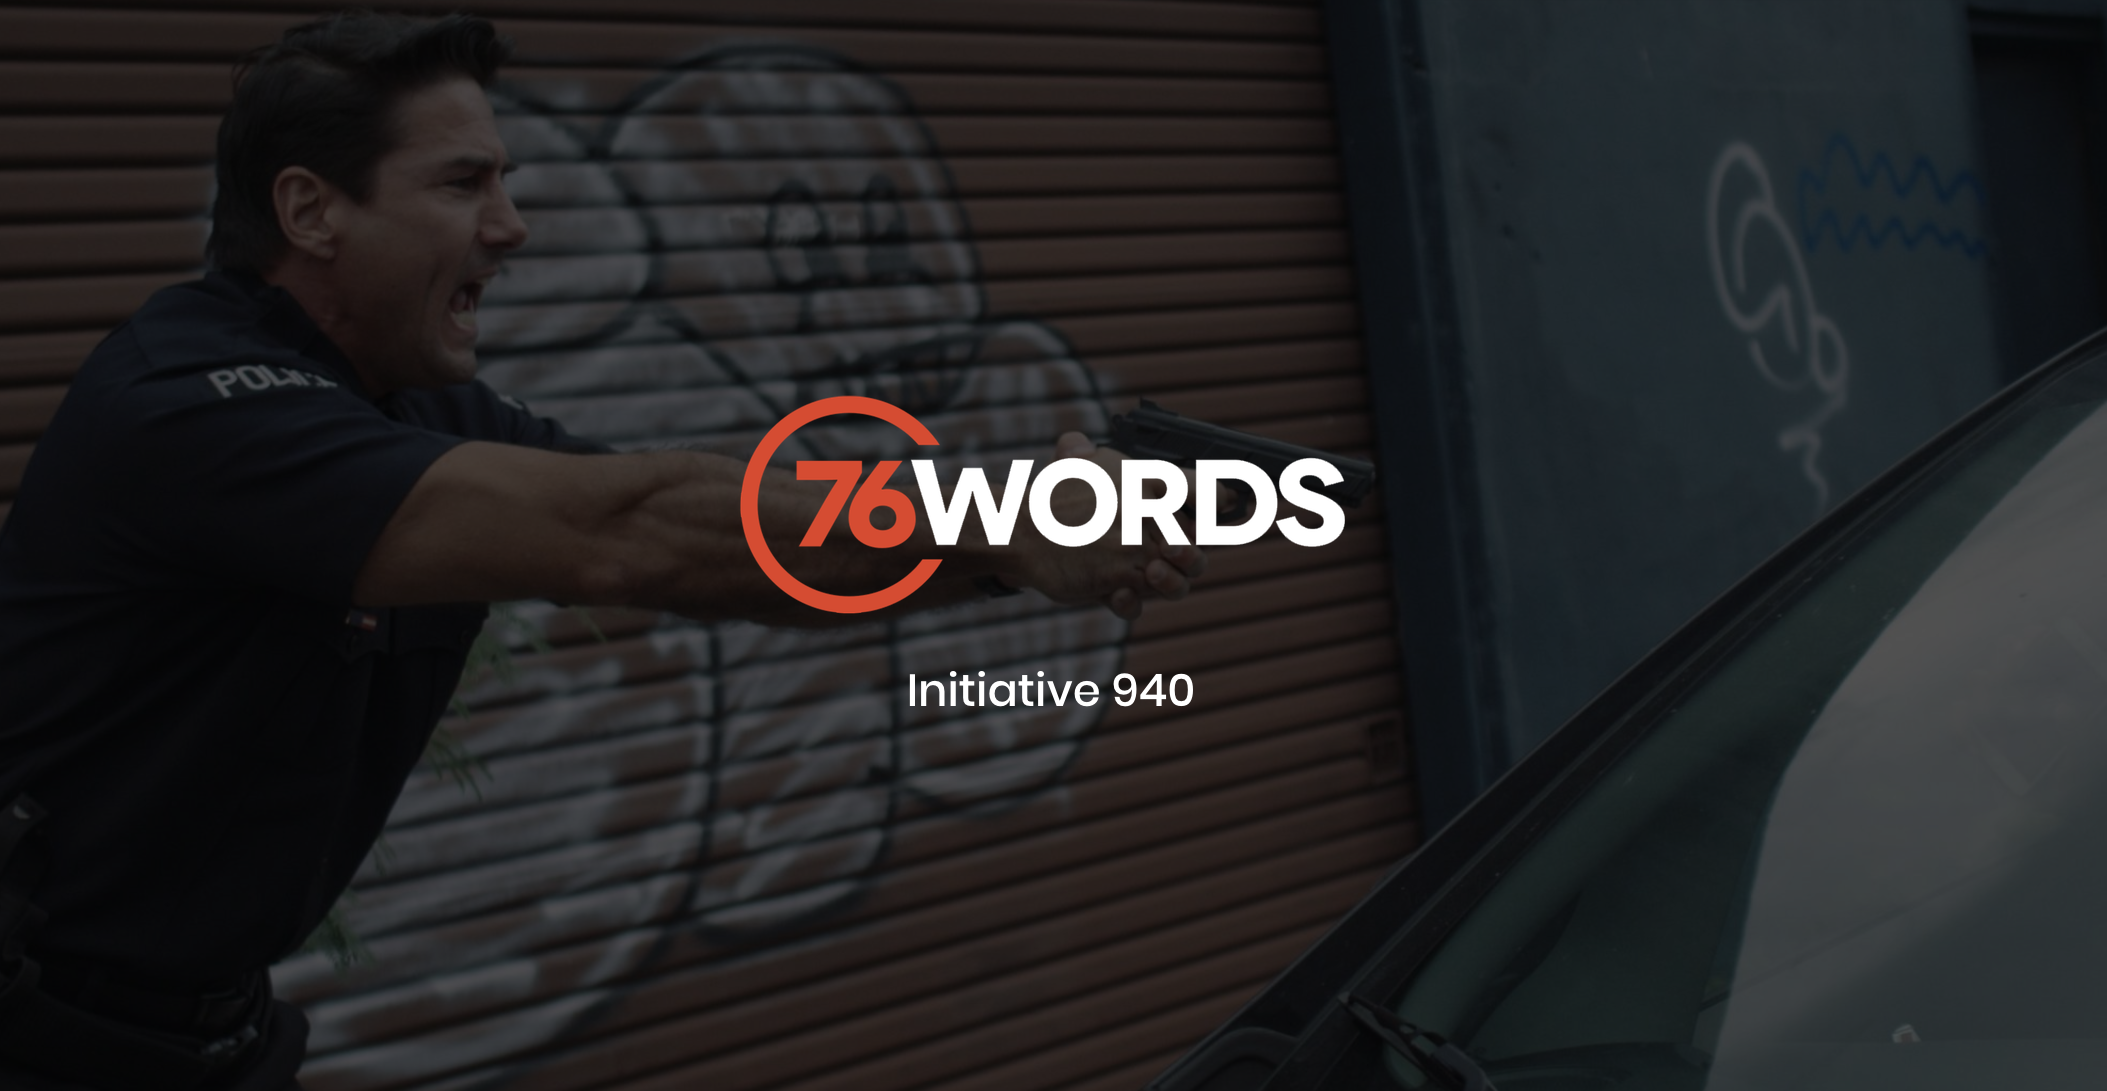 White and orange 76 Words Initiative 940 logo with a dimmed background of a side profile of an officer with gun drawn yelling at someone in a car with graffiti on a garage door in the background